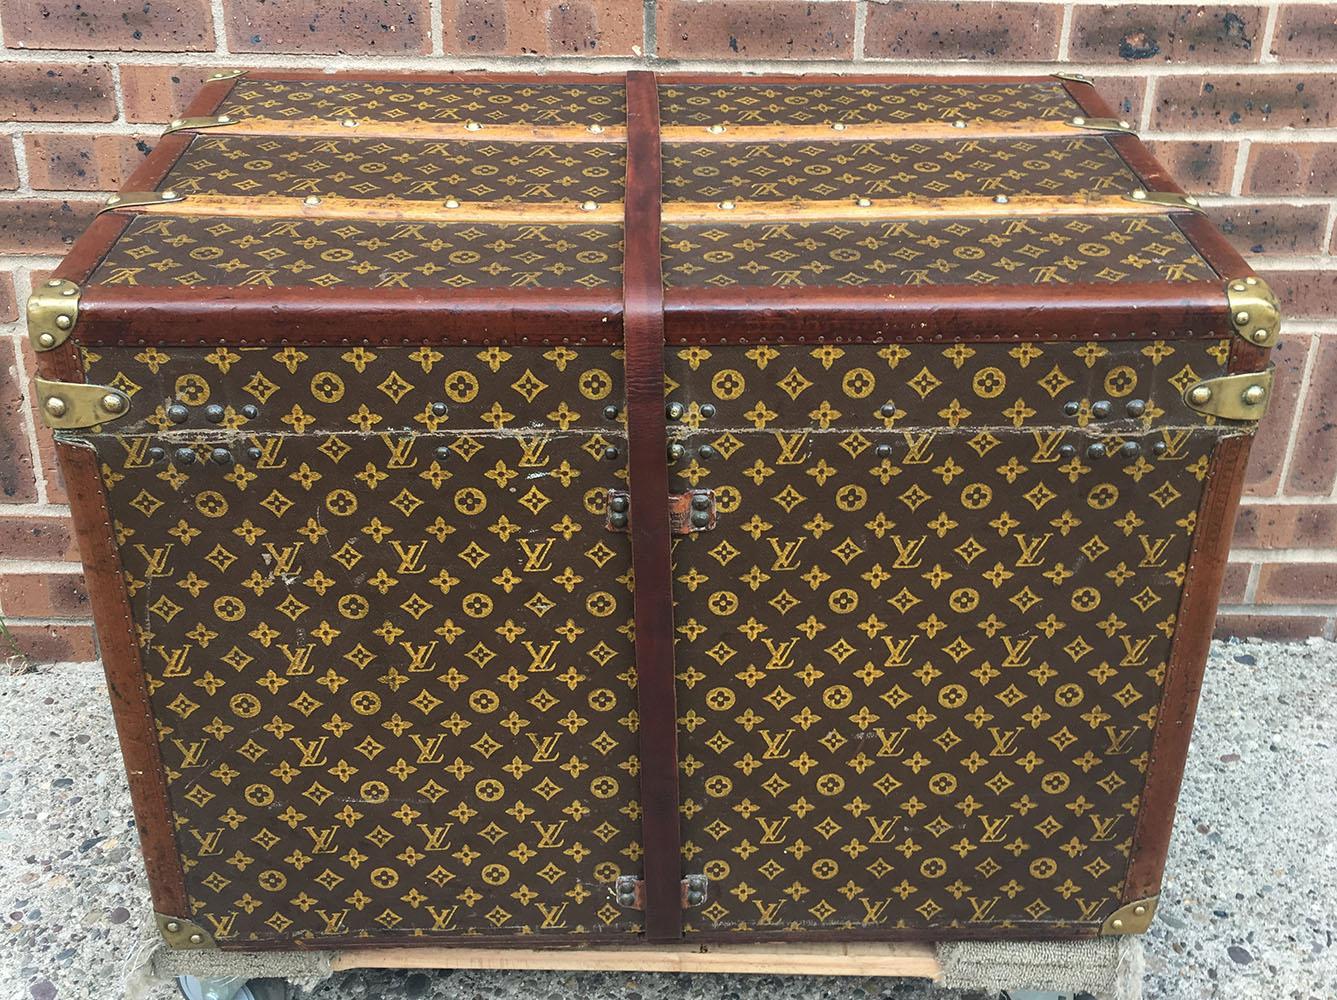 Women's or Men's Louis Vuitton Antique Monogram Small Steamer Trunk with Basket Tray c1920s